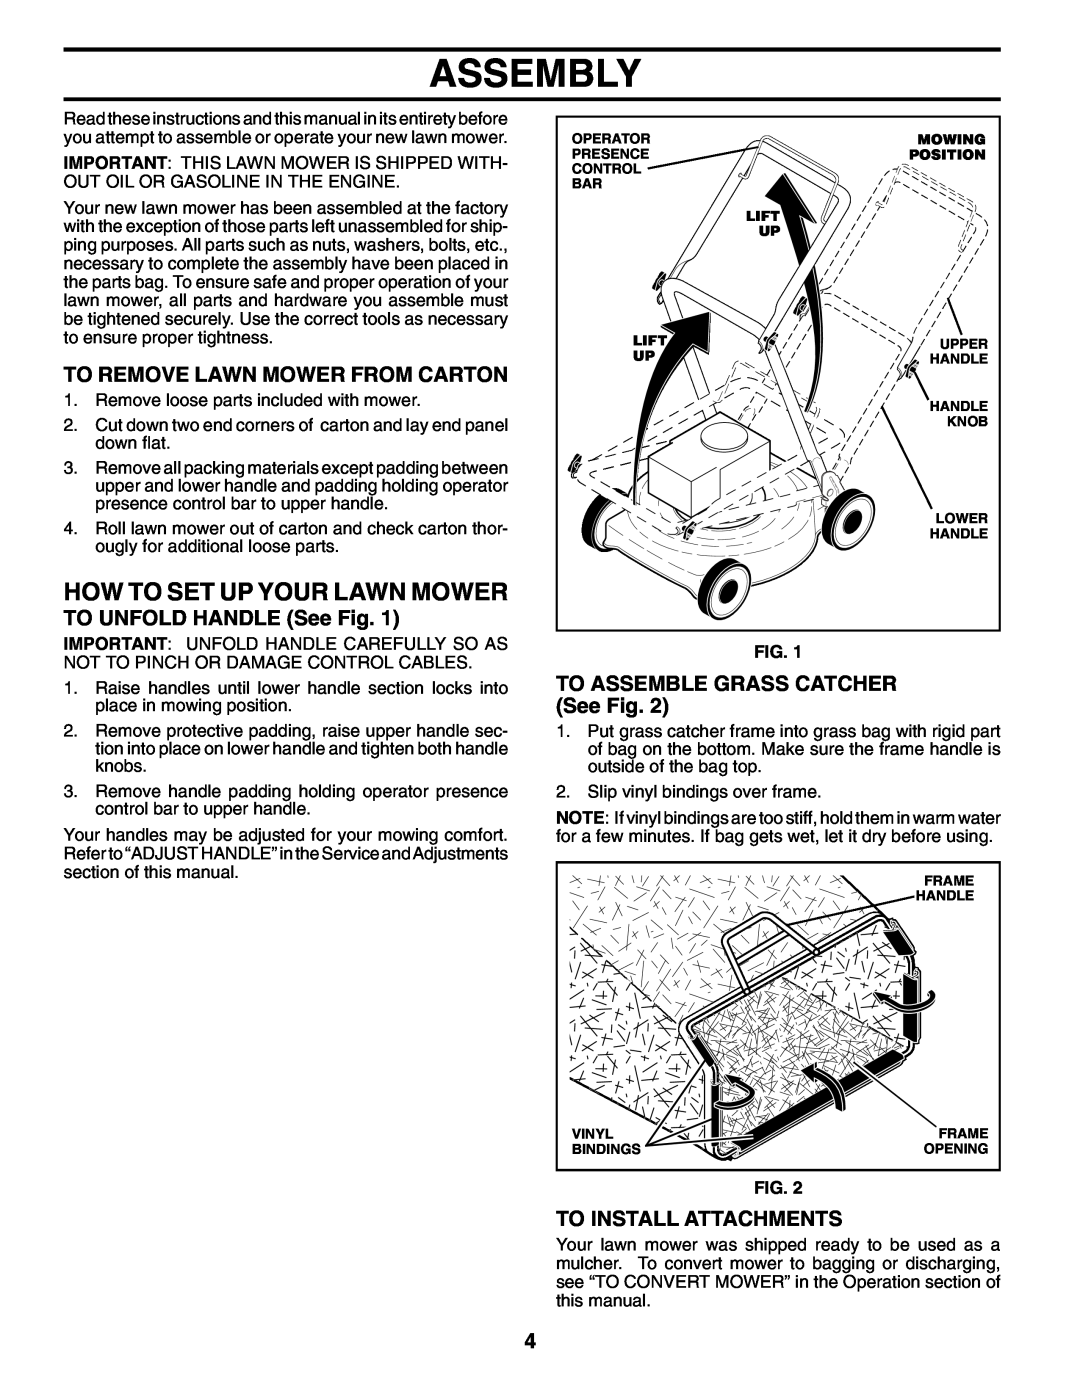 Husqvarna 65021CHV Assembly, How To Set Up Your Lawn Mower, To Remove Lawn Mower From Carton, TO UNFOLD HANDLE See Fig 